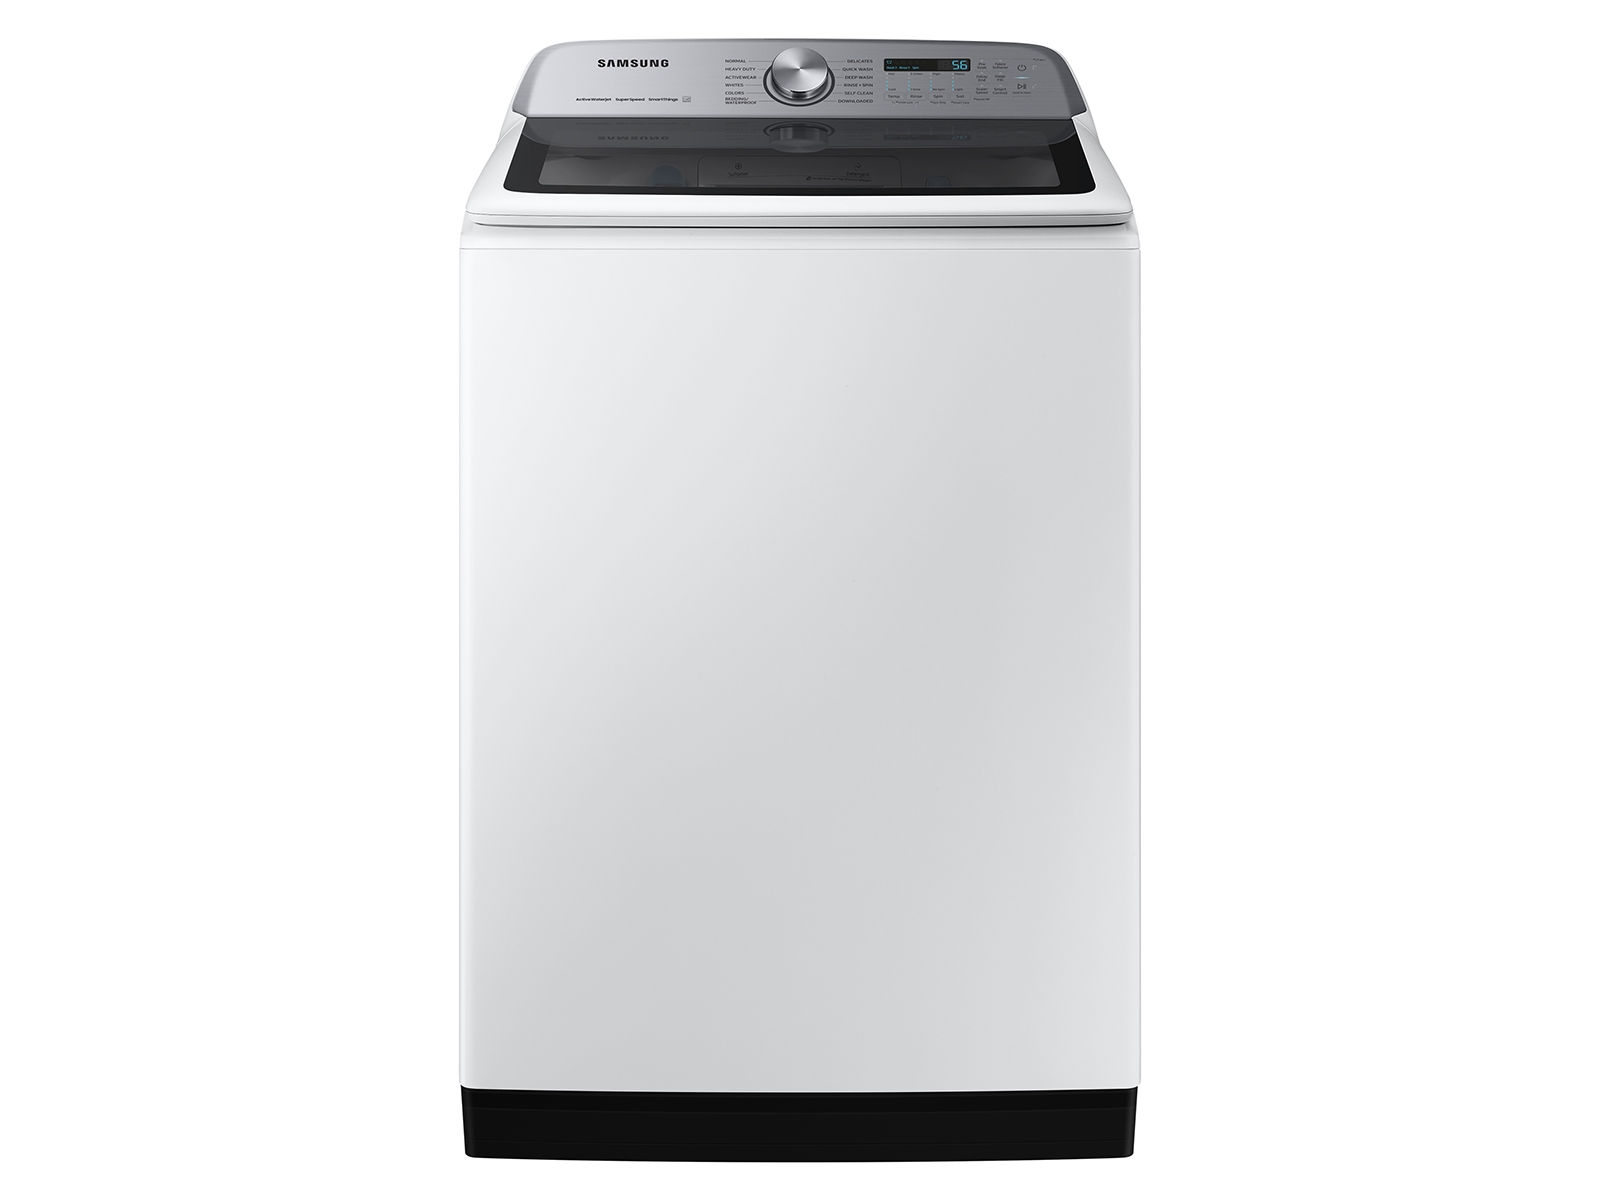 Photos - Washing Machine Samsung 5.4 cu. ft. Extra-Large Capacity Smart Top Load Washer with Active 